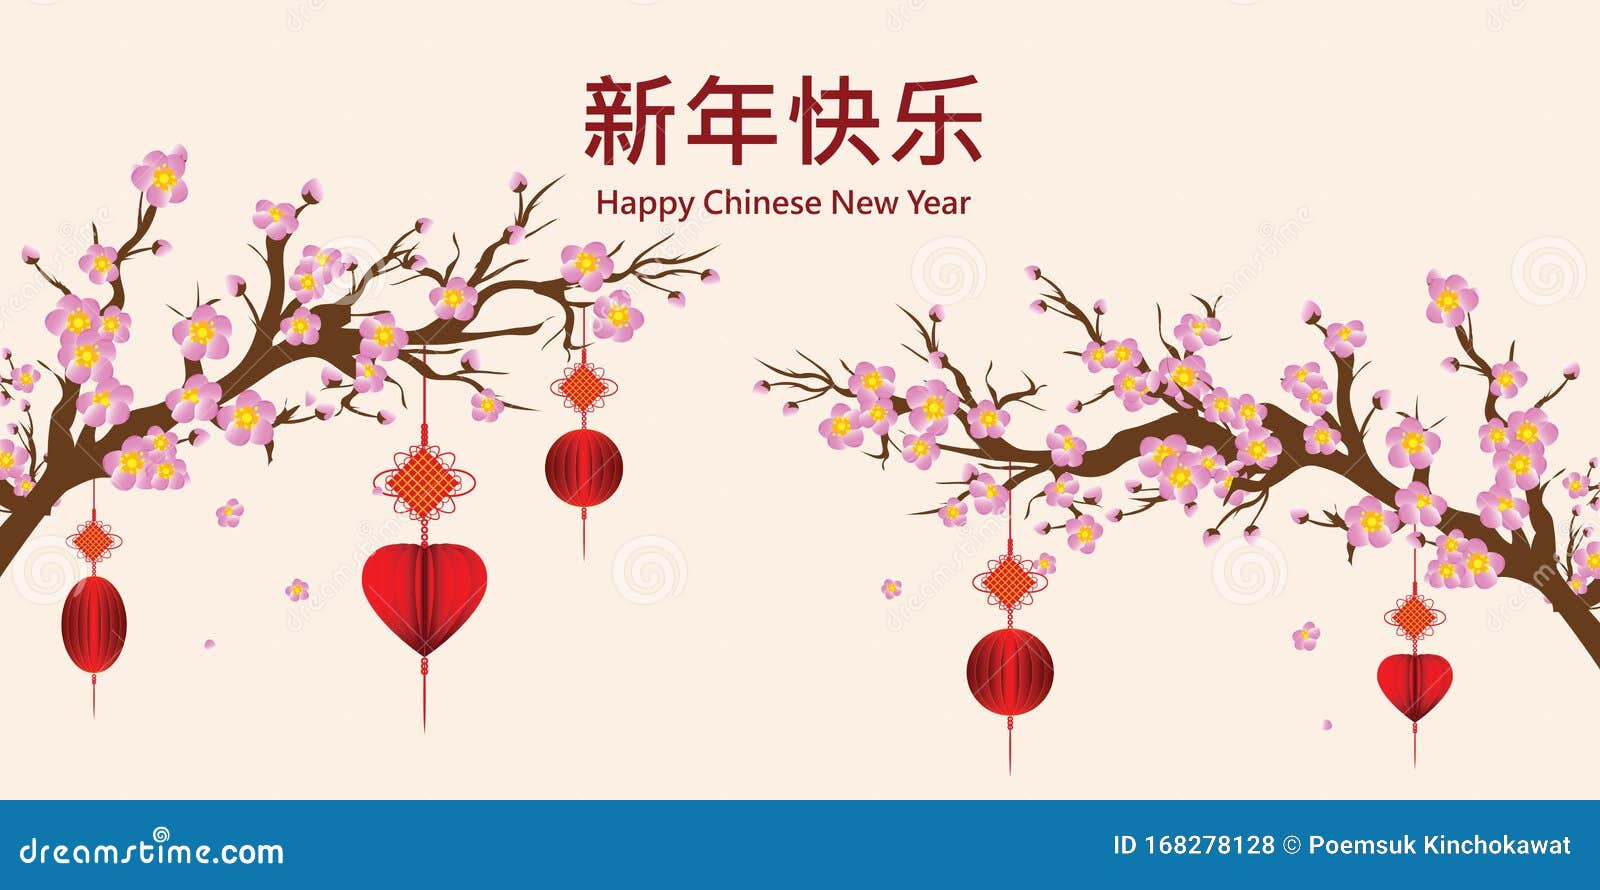 Chinese new year greeting decoration banner Vector Image